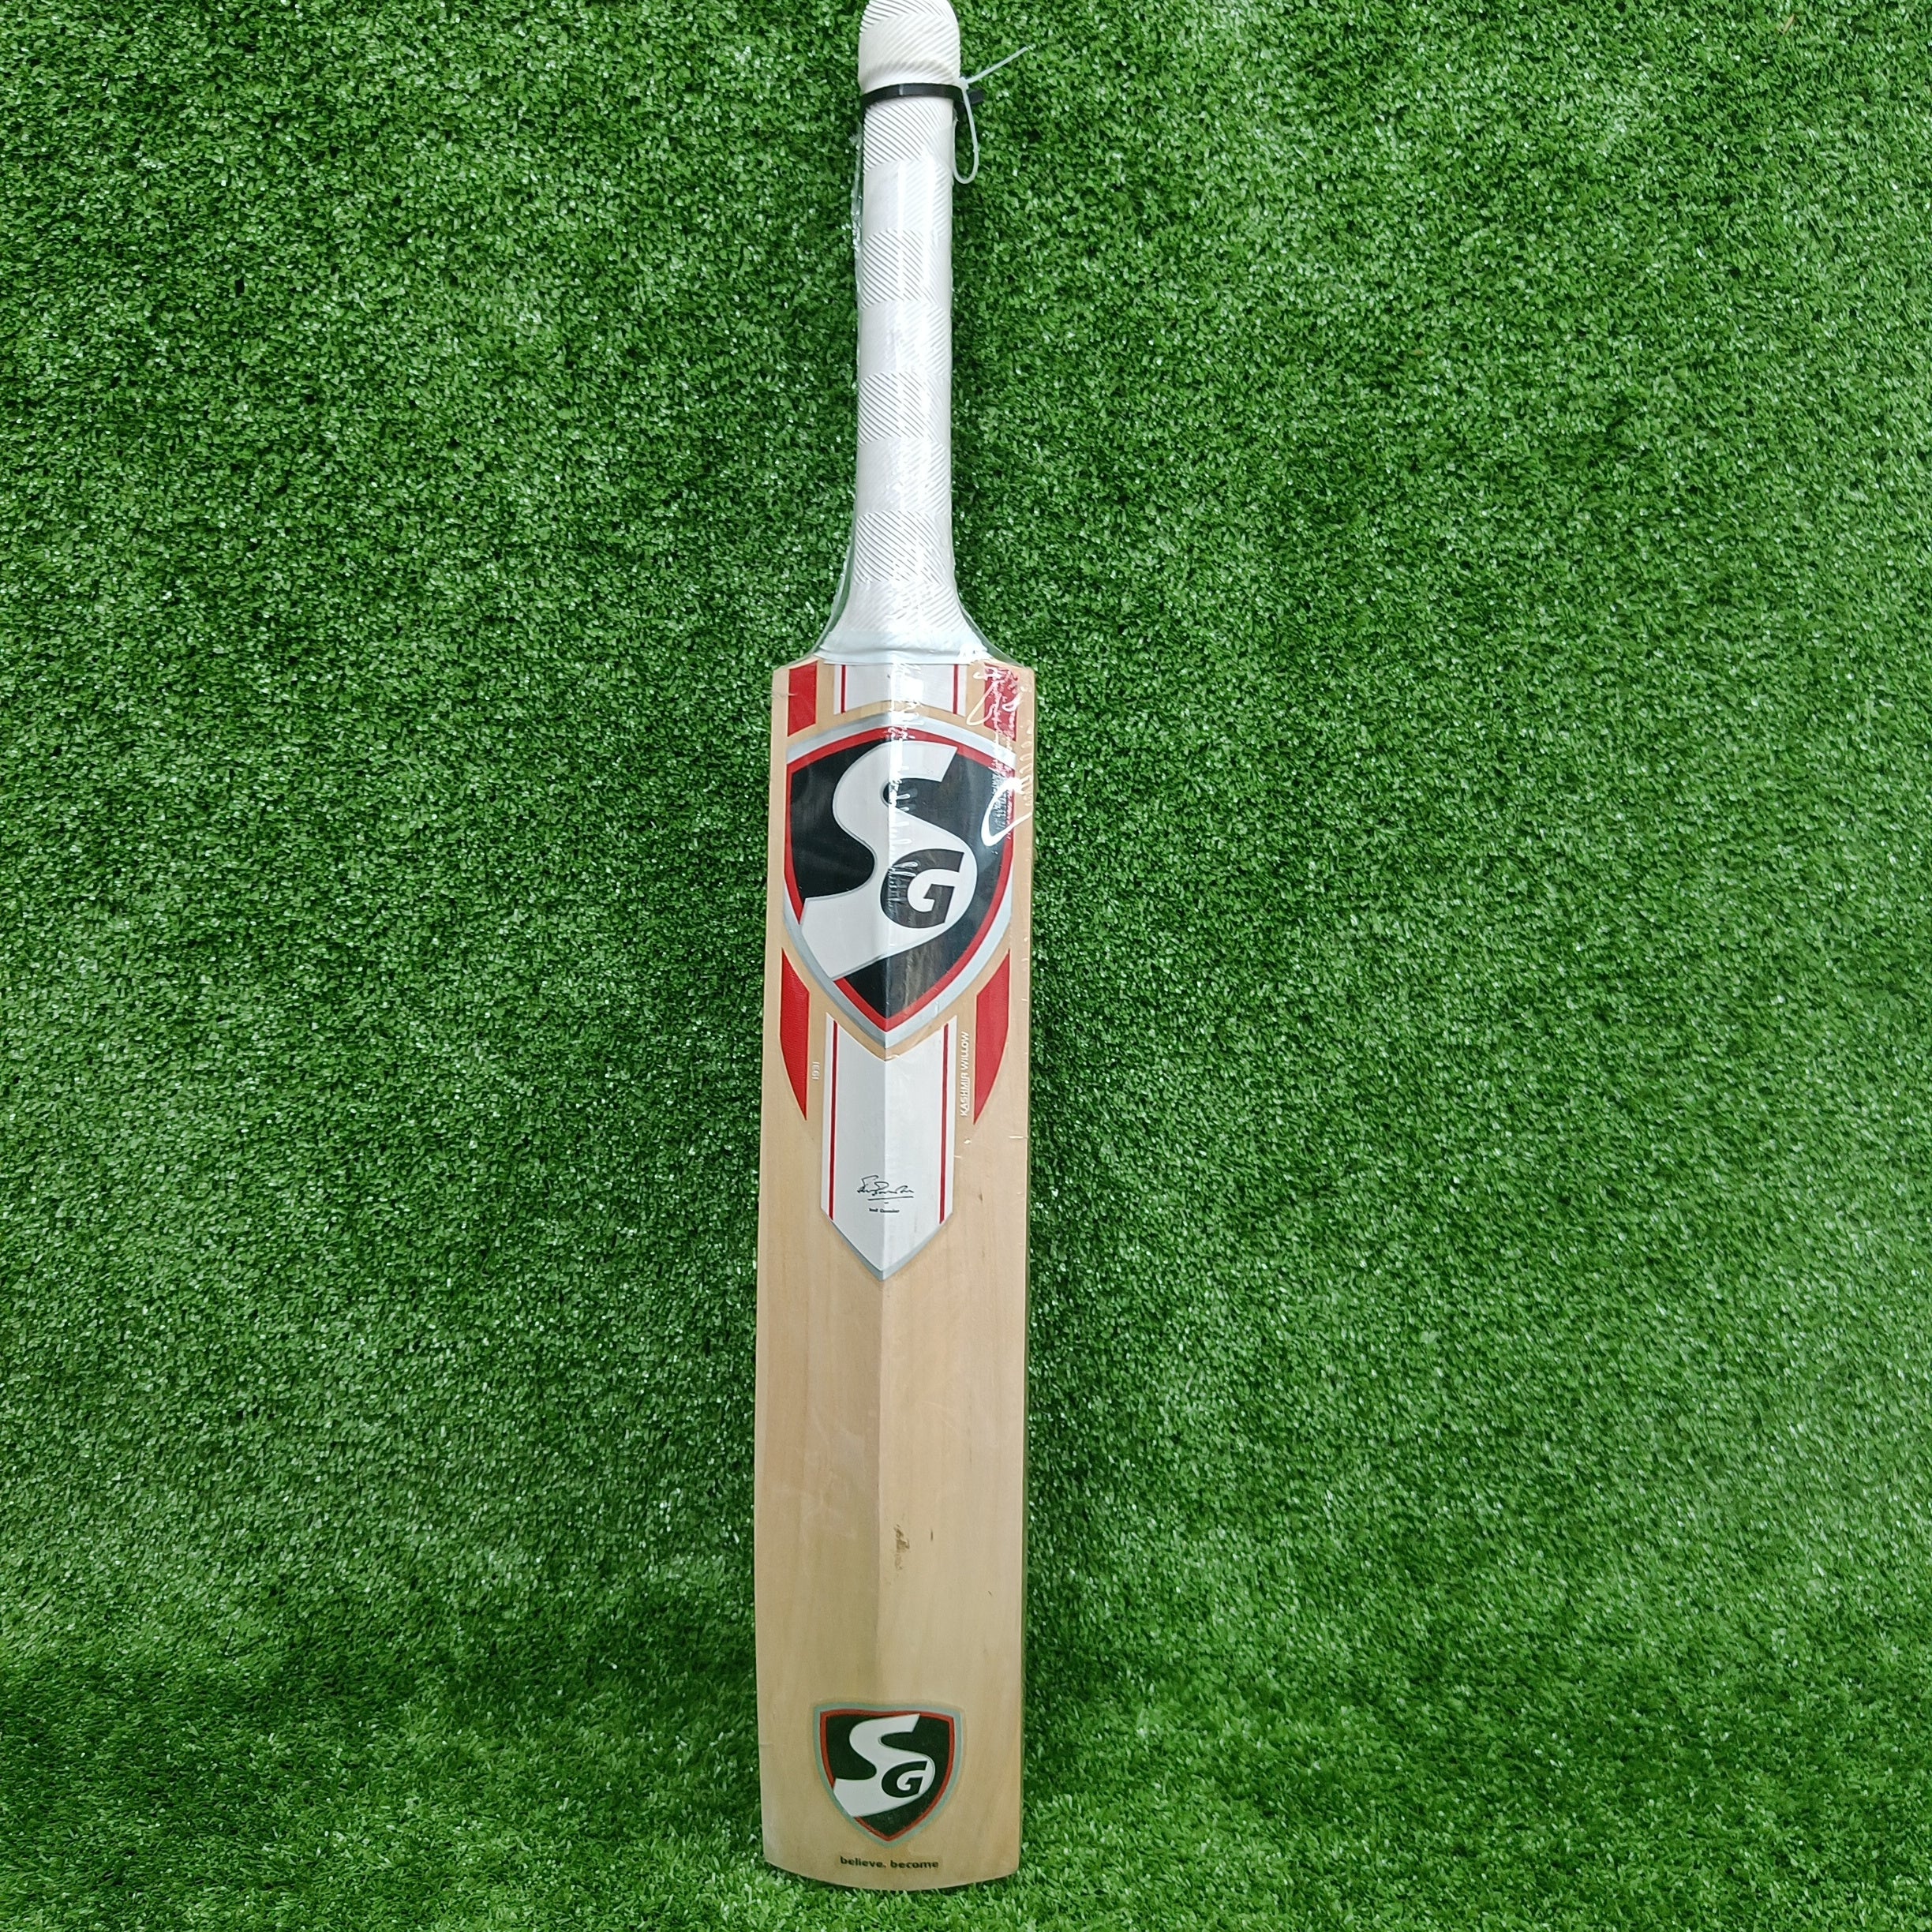 SG Catch Bat (For Catching Practice)